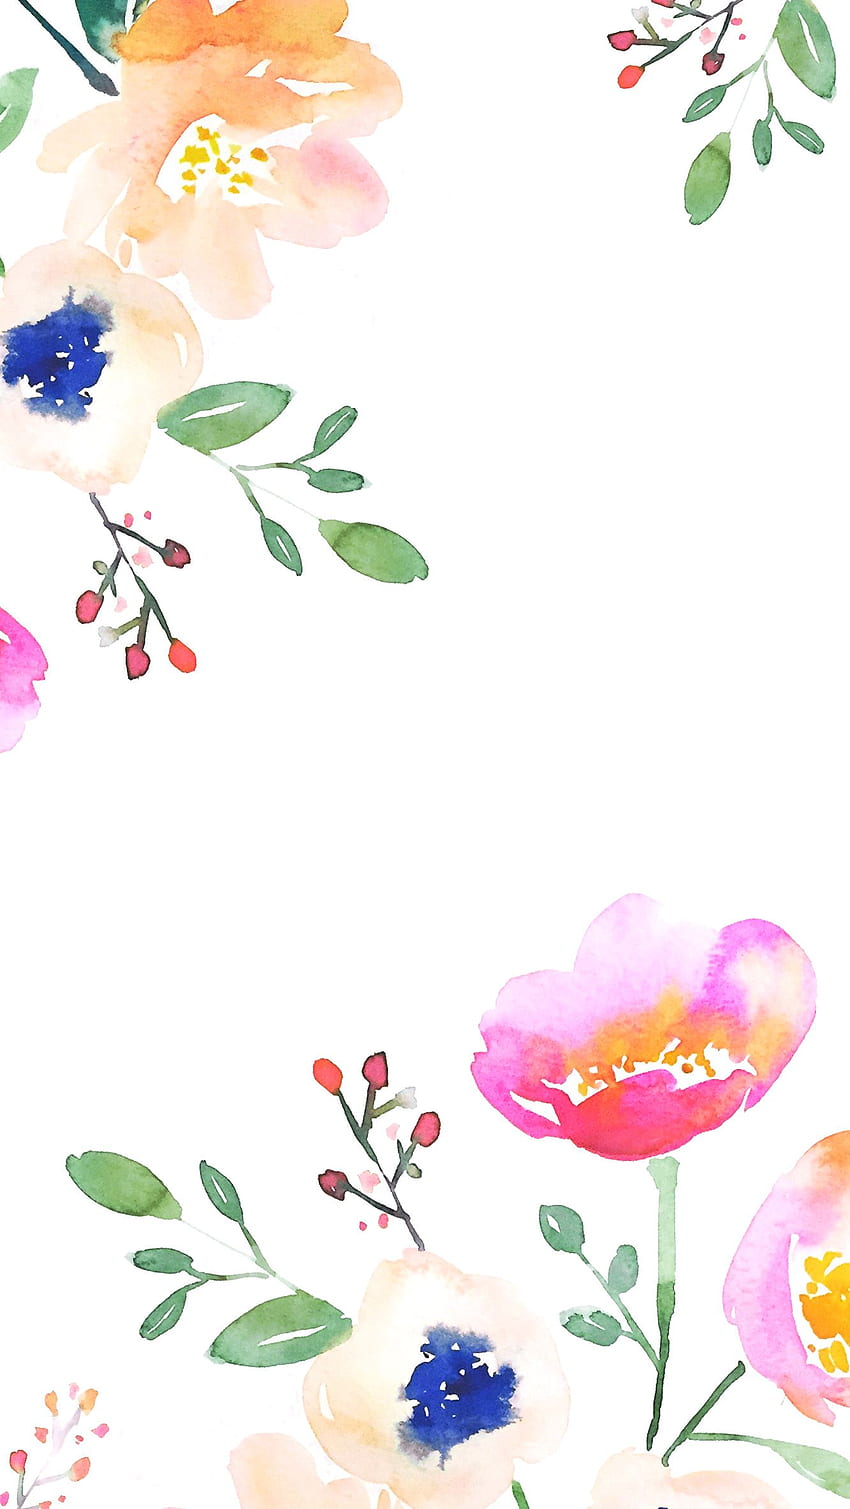 1000 Watercolor Flower Pictures  Download Free Images on Unsplash